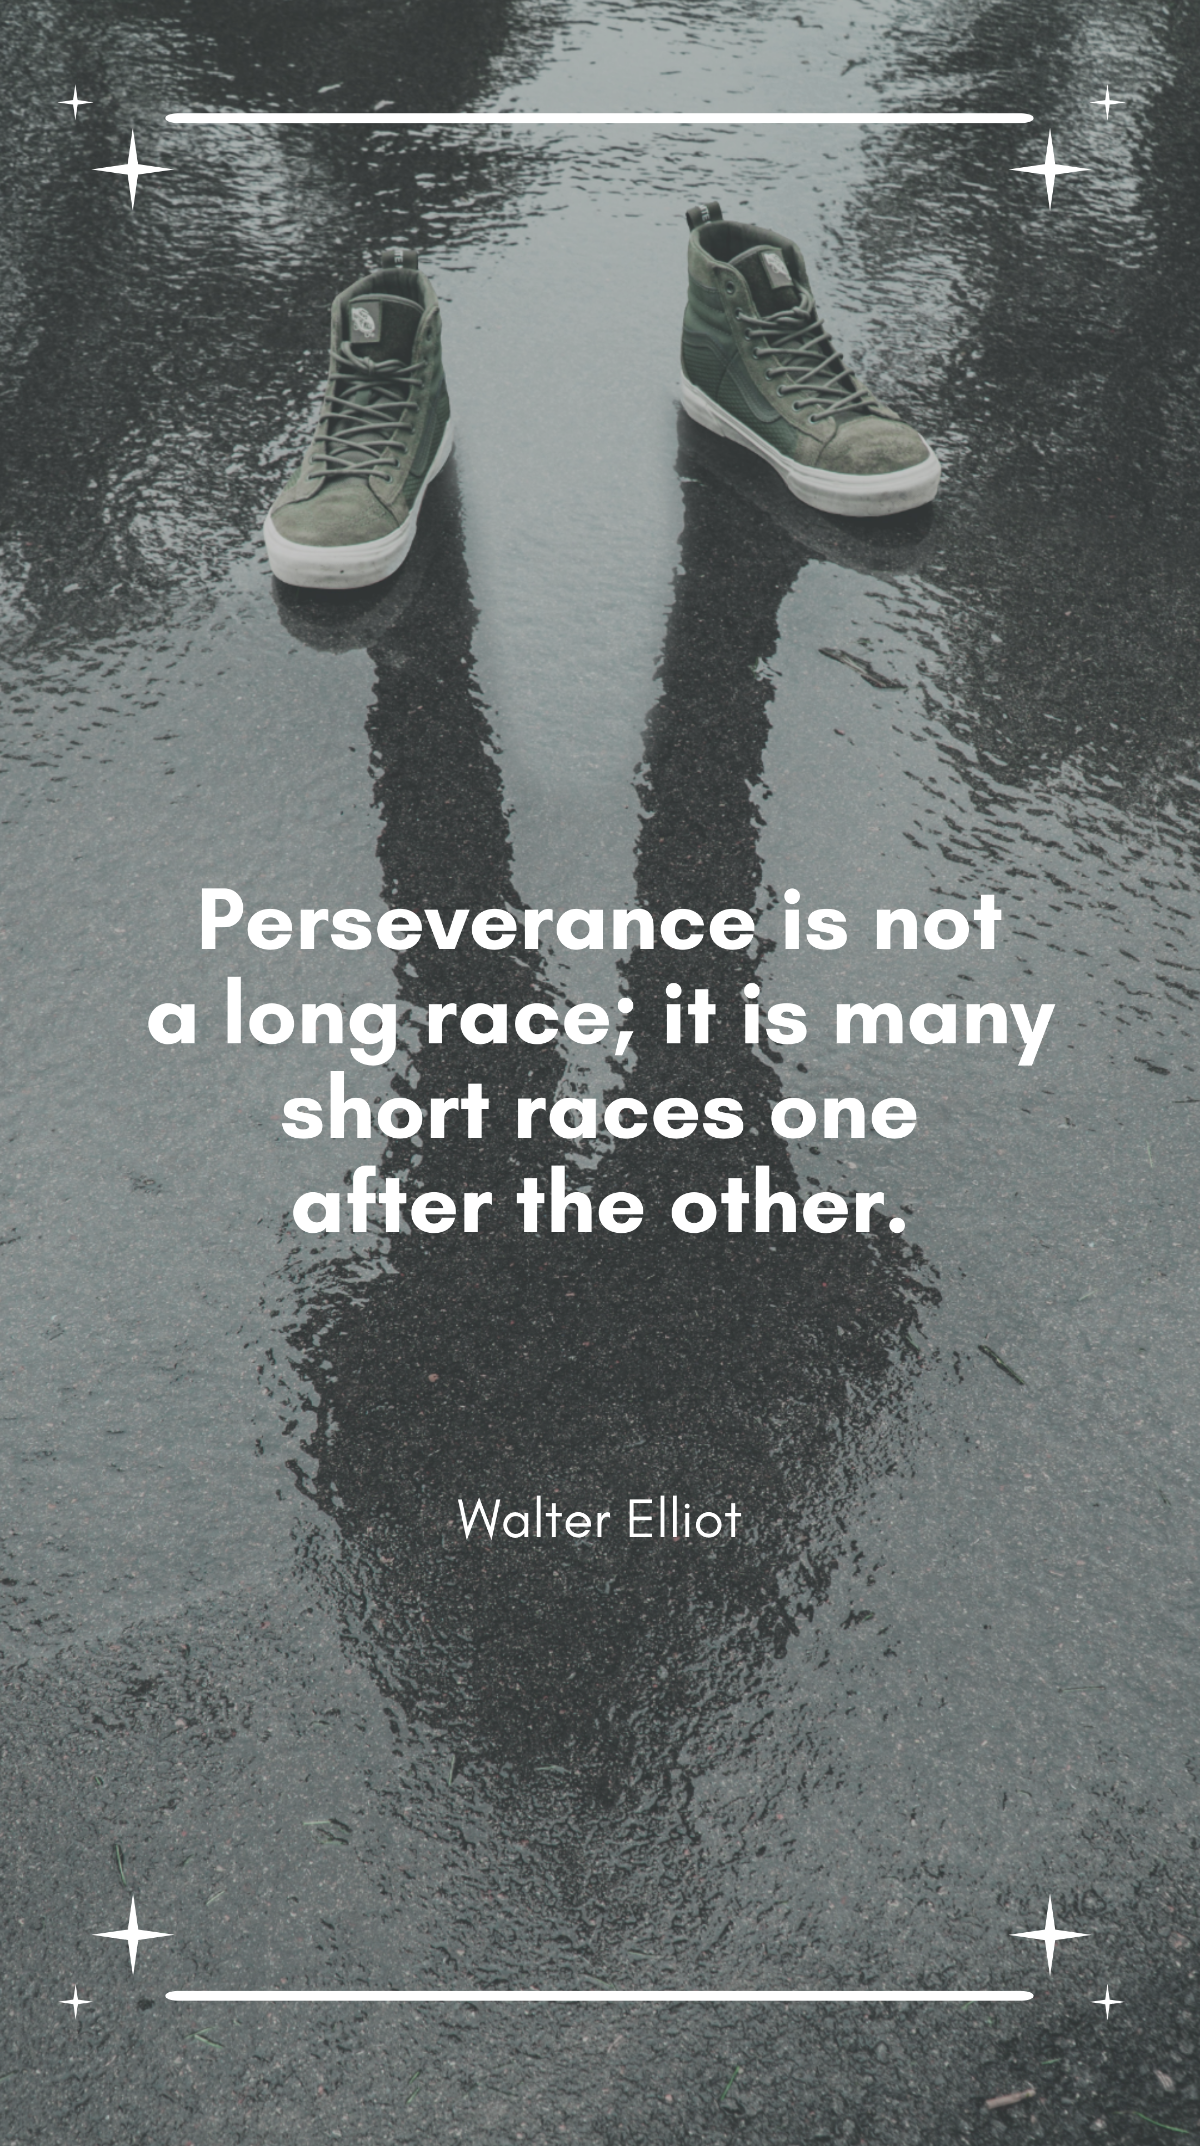 Walter Elliot - Perseverance is not a long race; it is many short races one after the other. Template